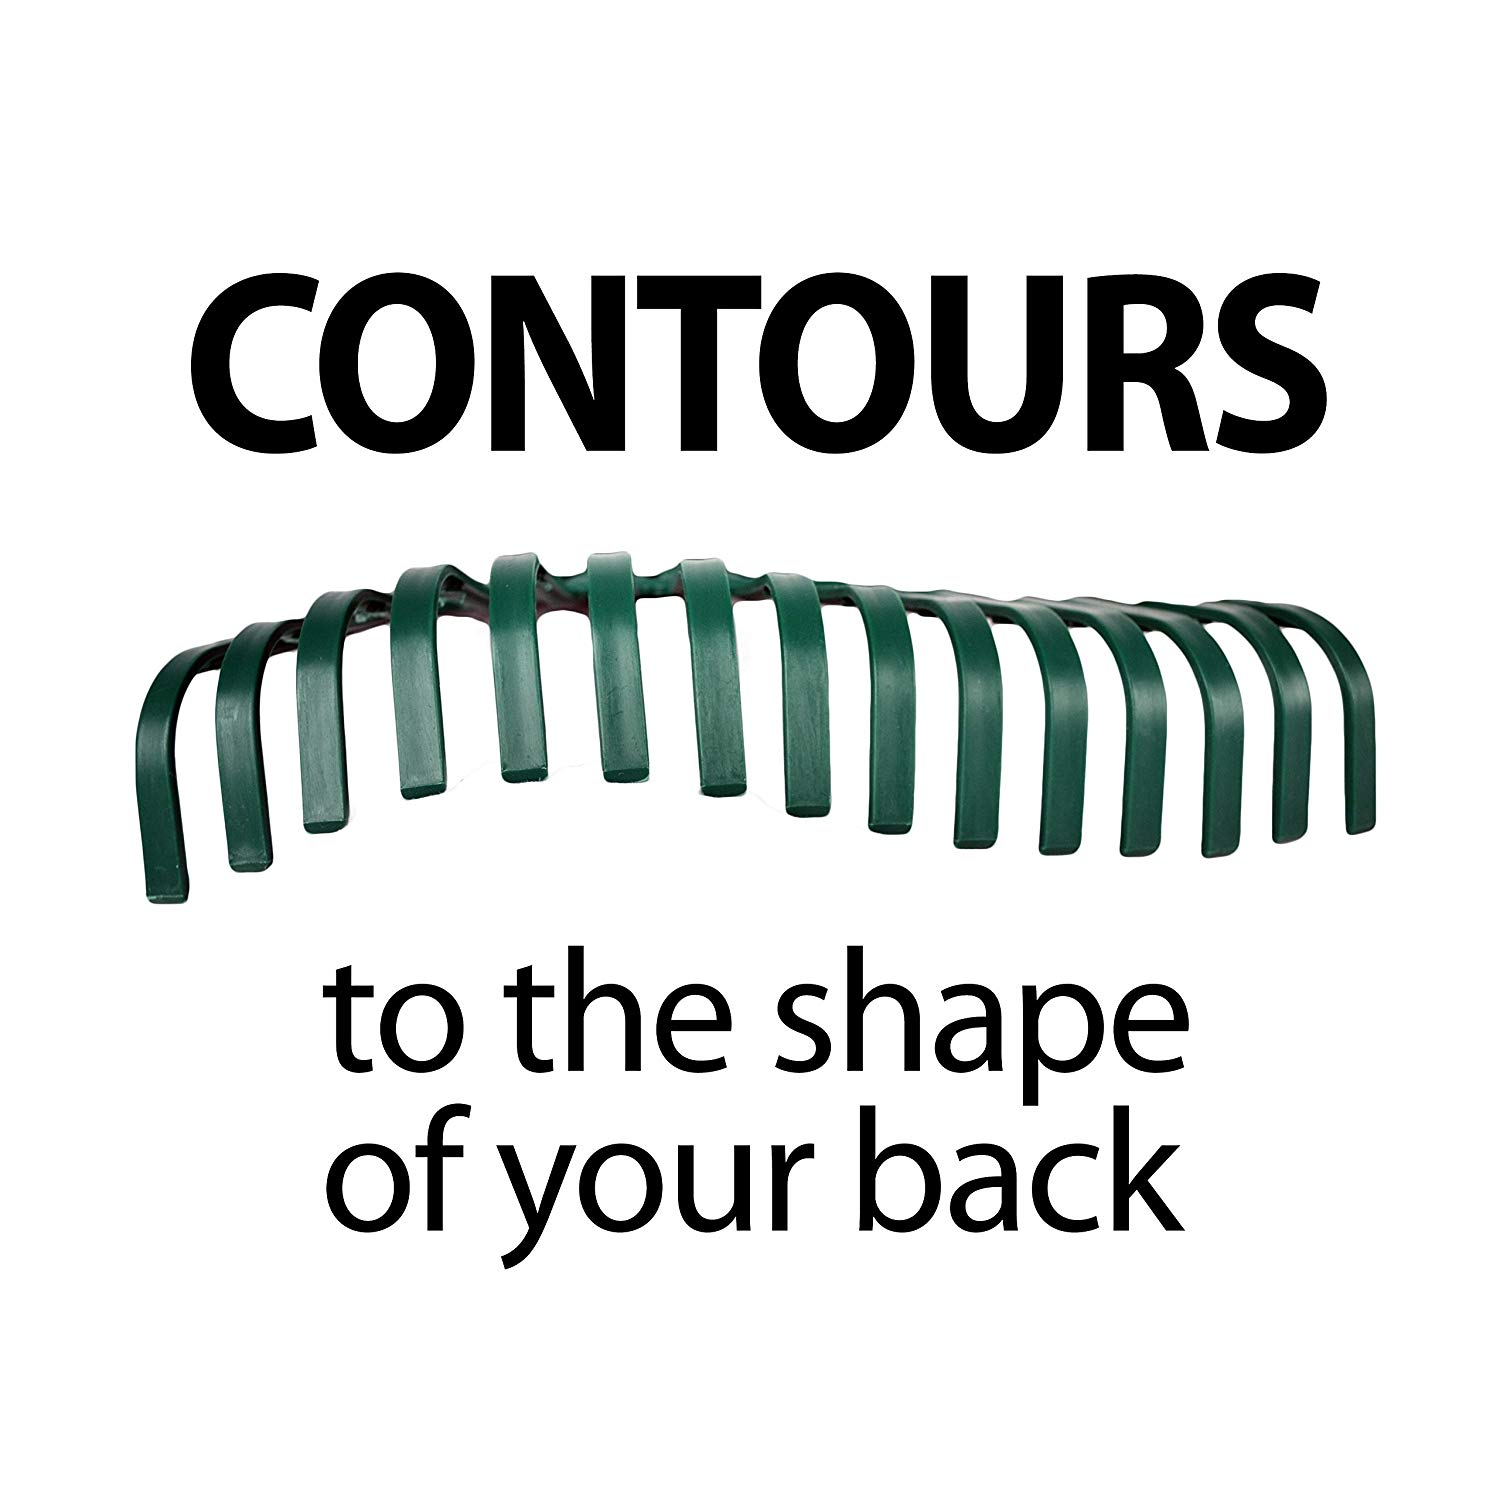 Contours to the shape of your back